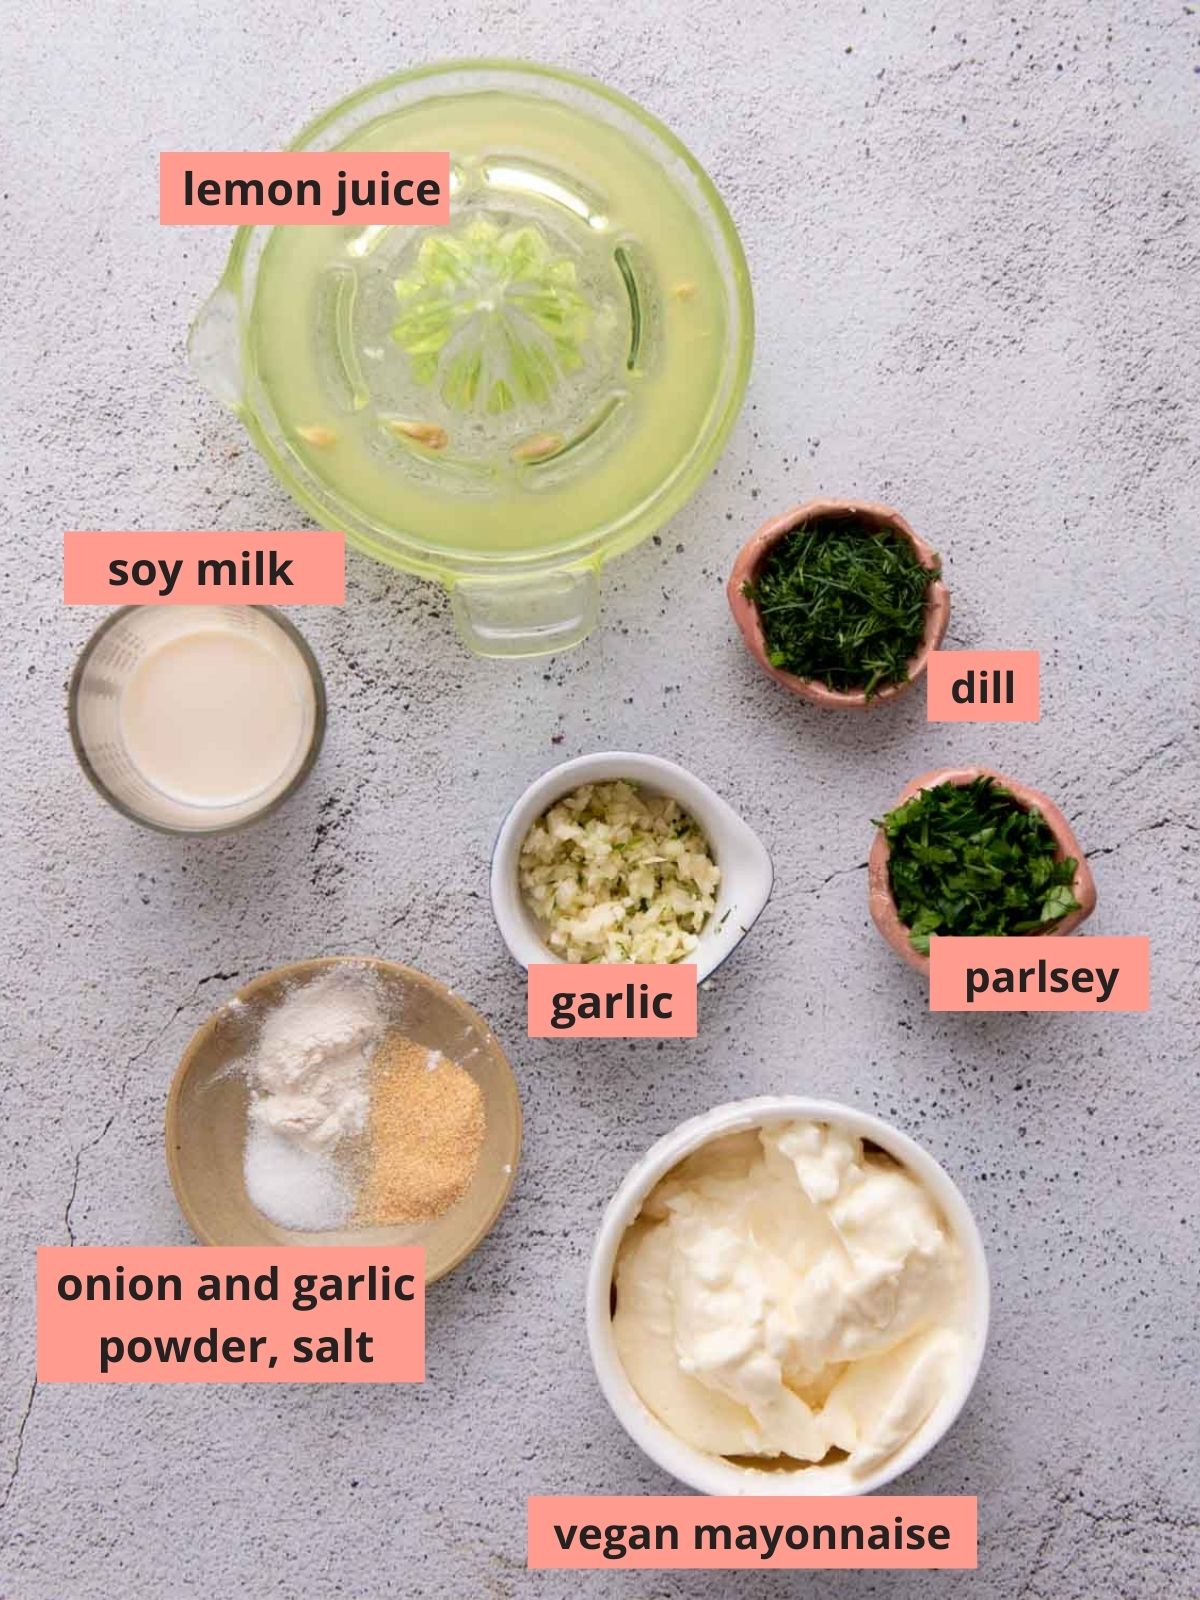 Labeled ingredients used to make ranch dressing